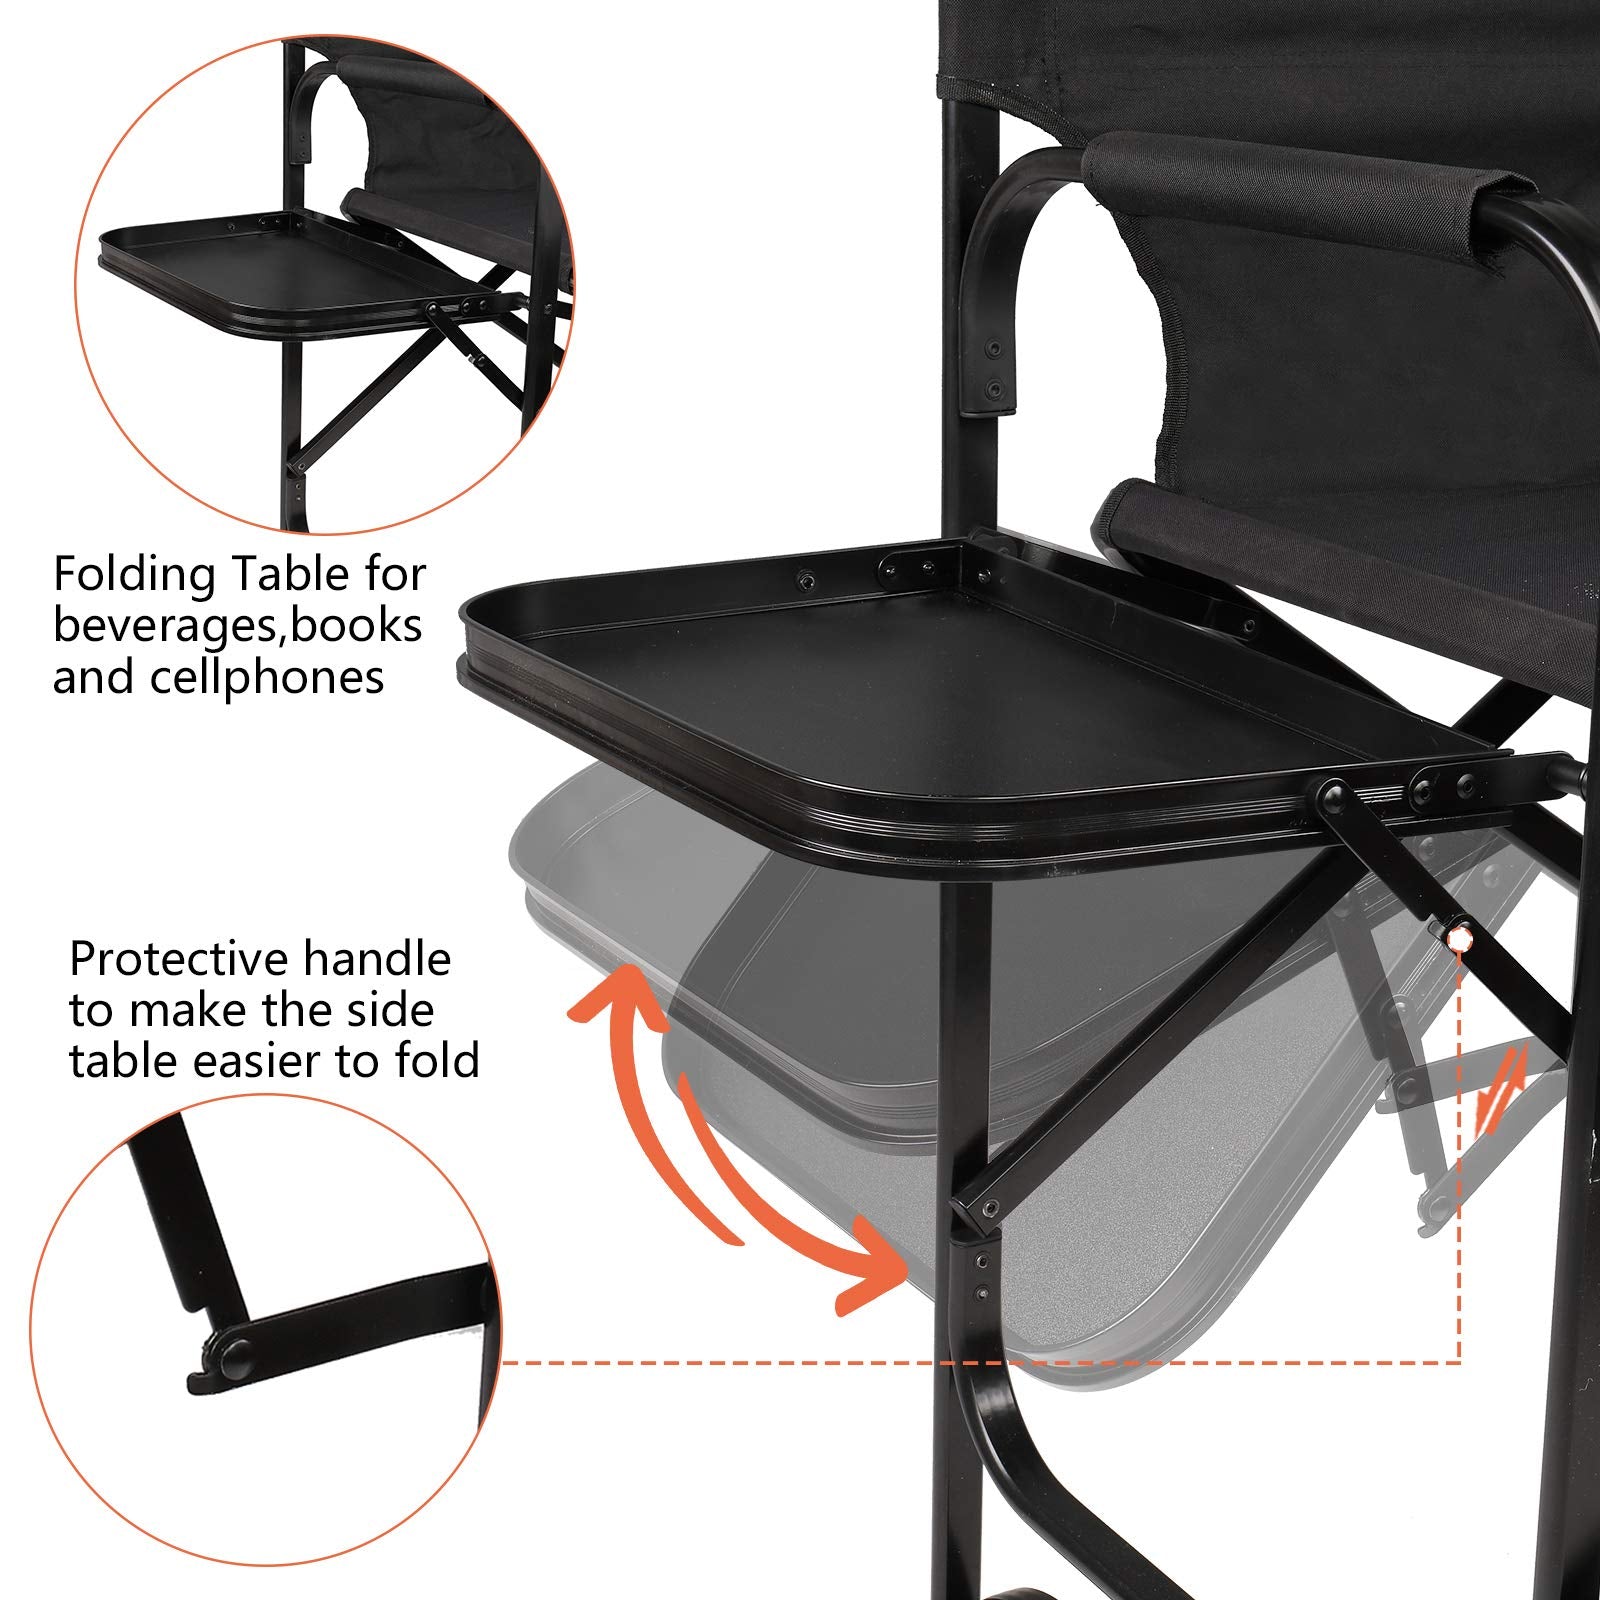 Omysalon 30in Folding Directors Chair 300 lbs with Collapsible Side Table Black